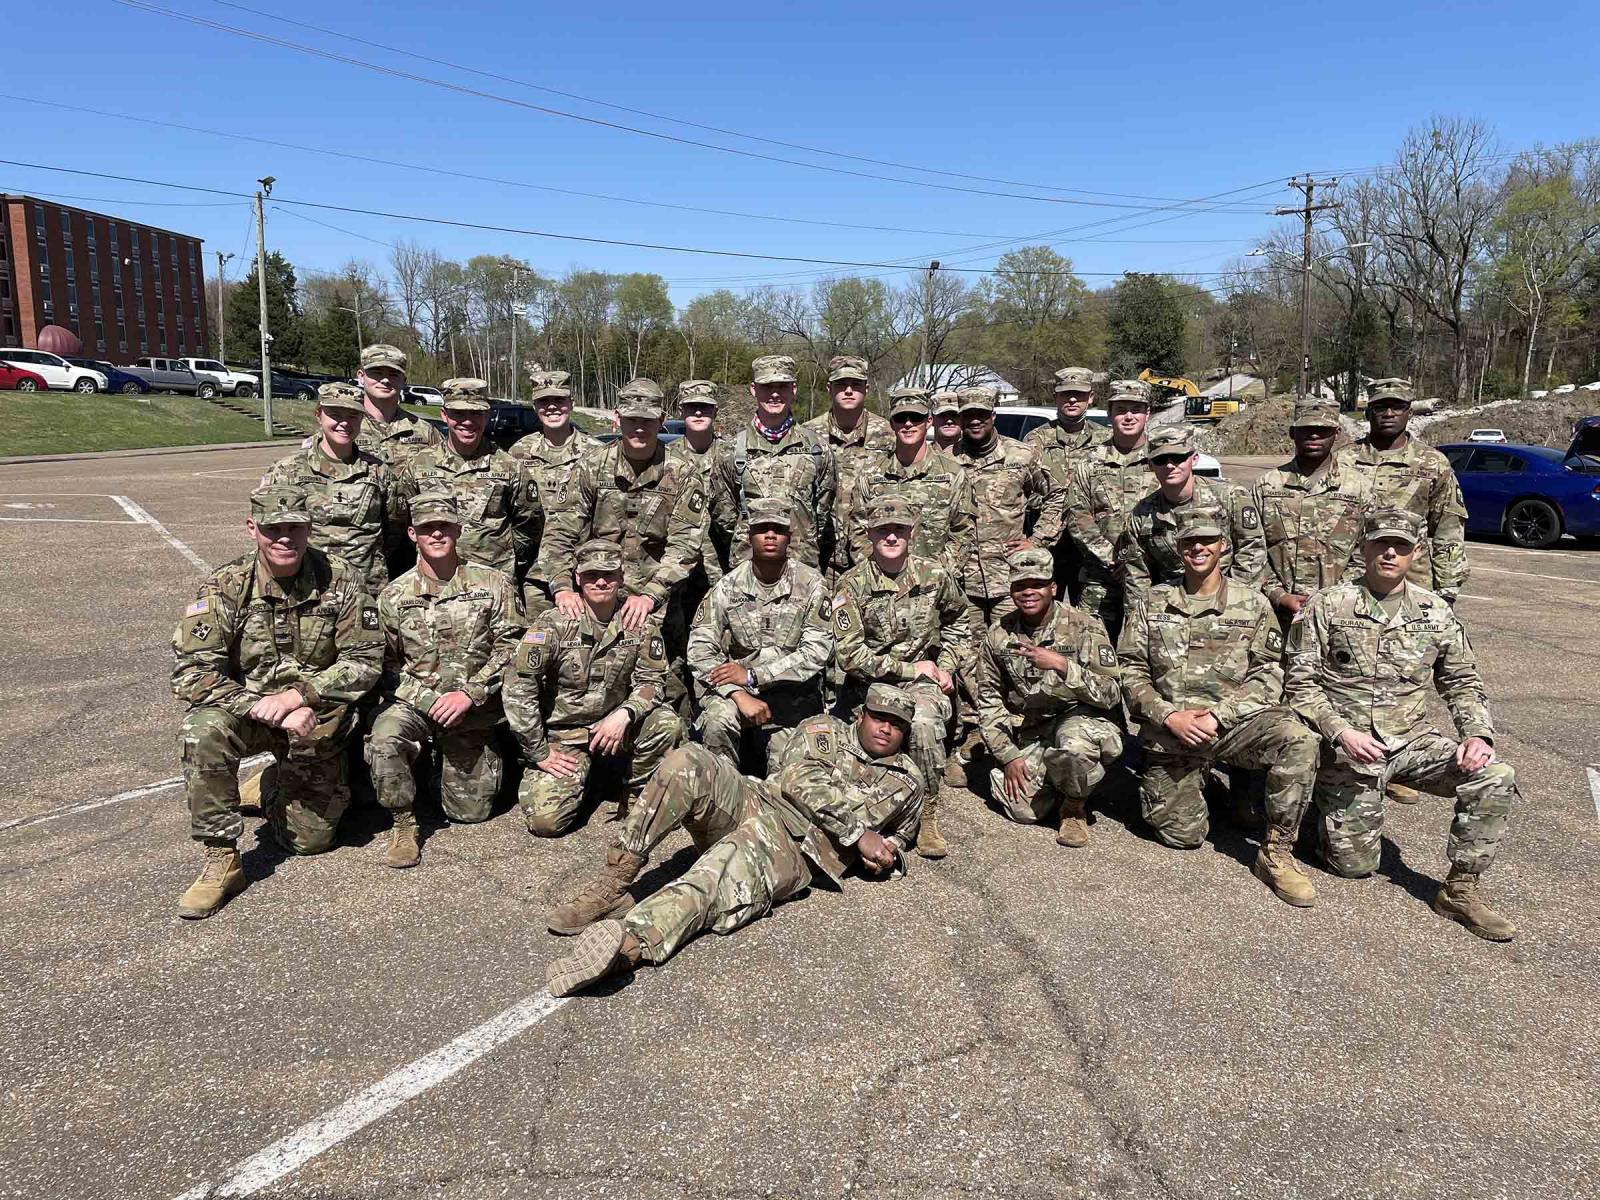 A group photo of Army ROTC soldiers at Mississippi State University